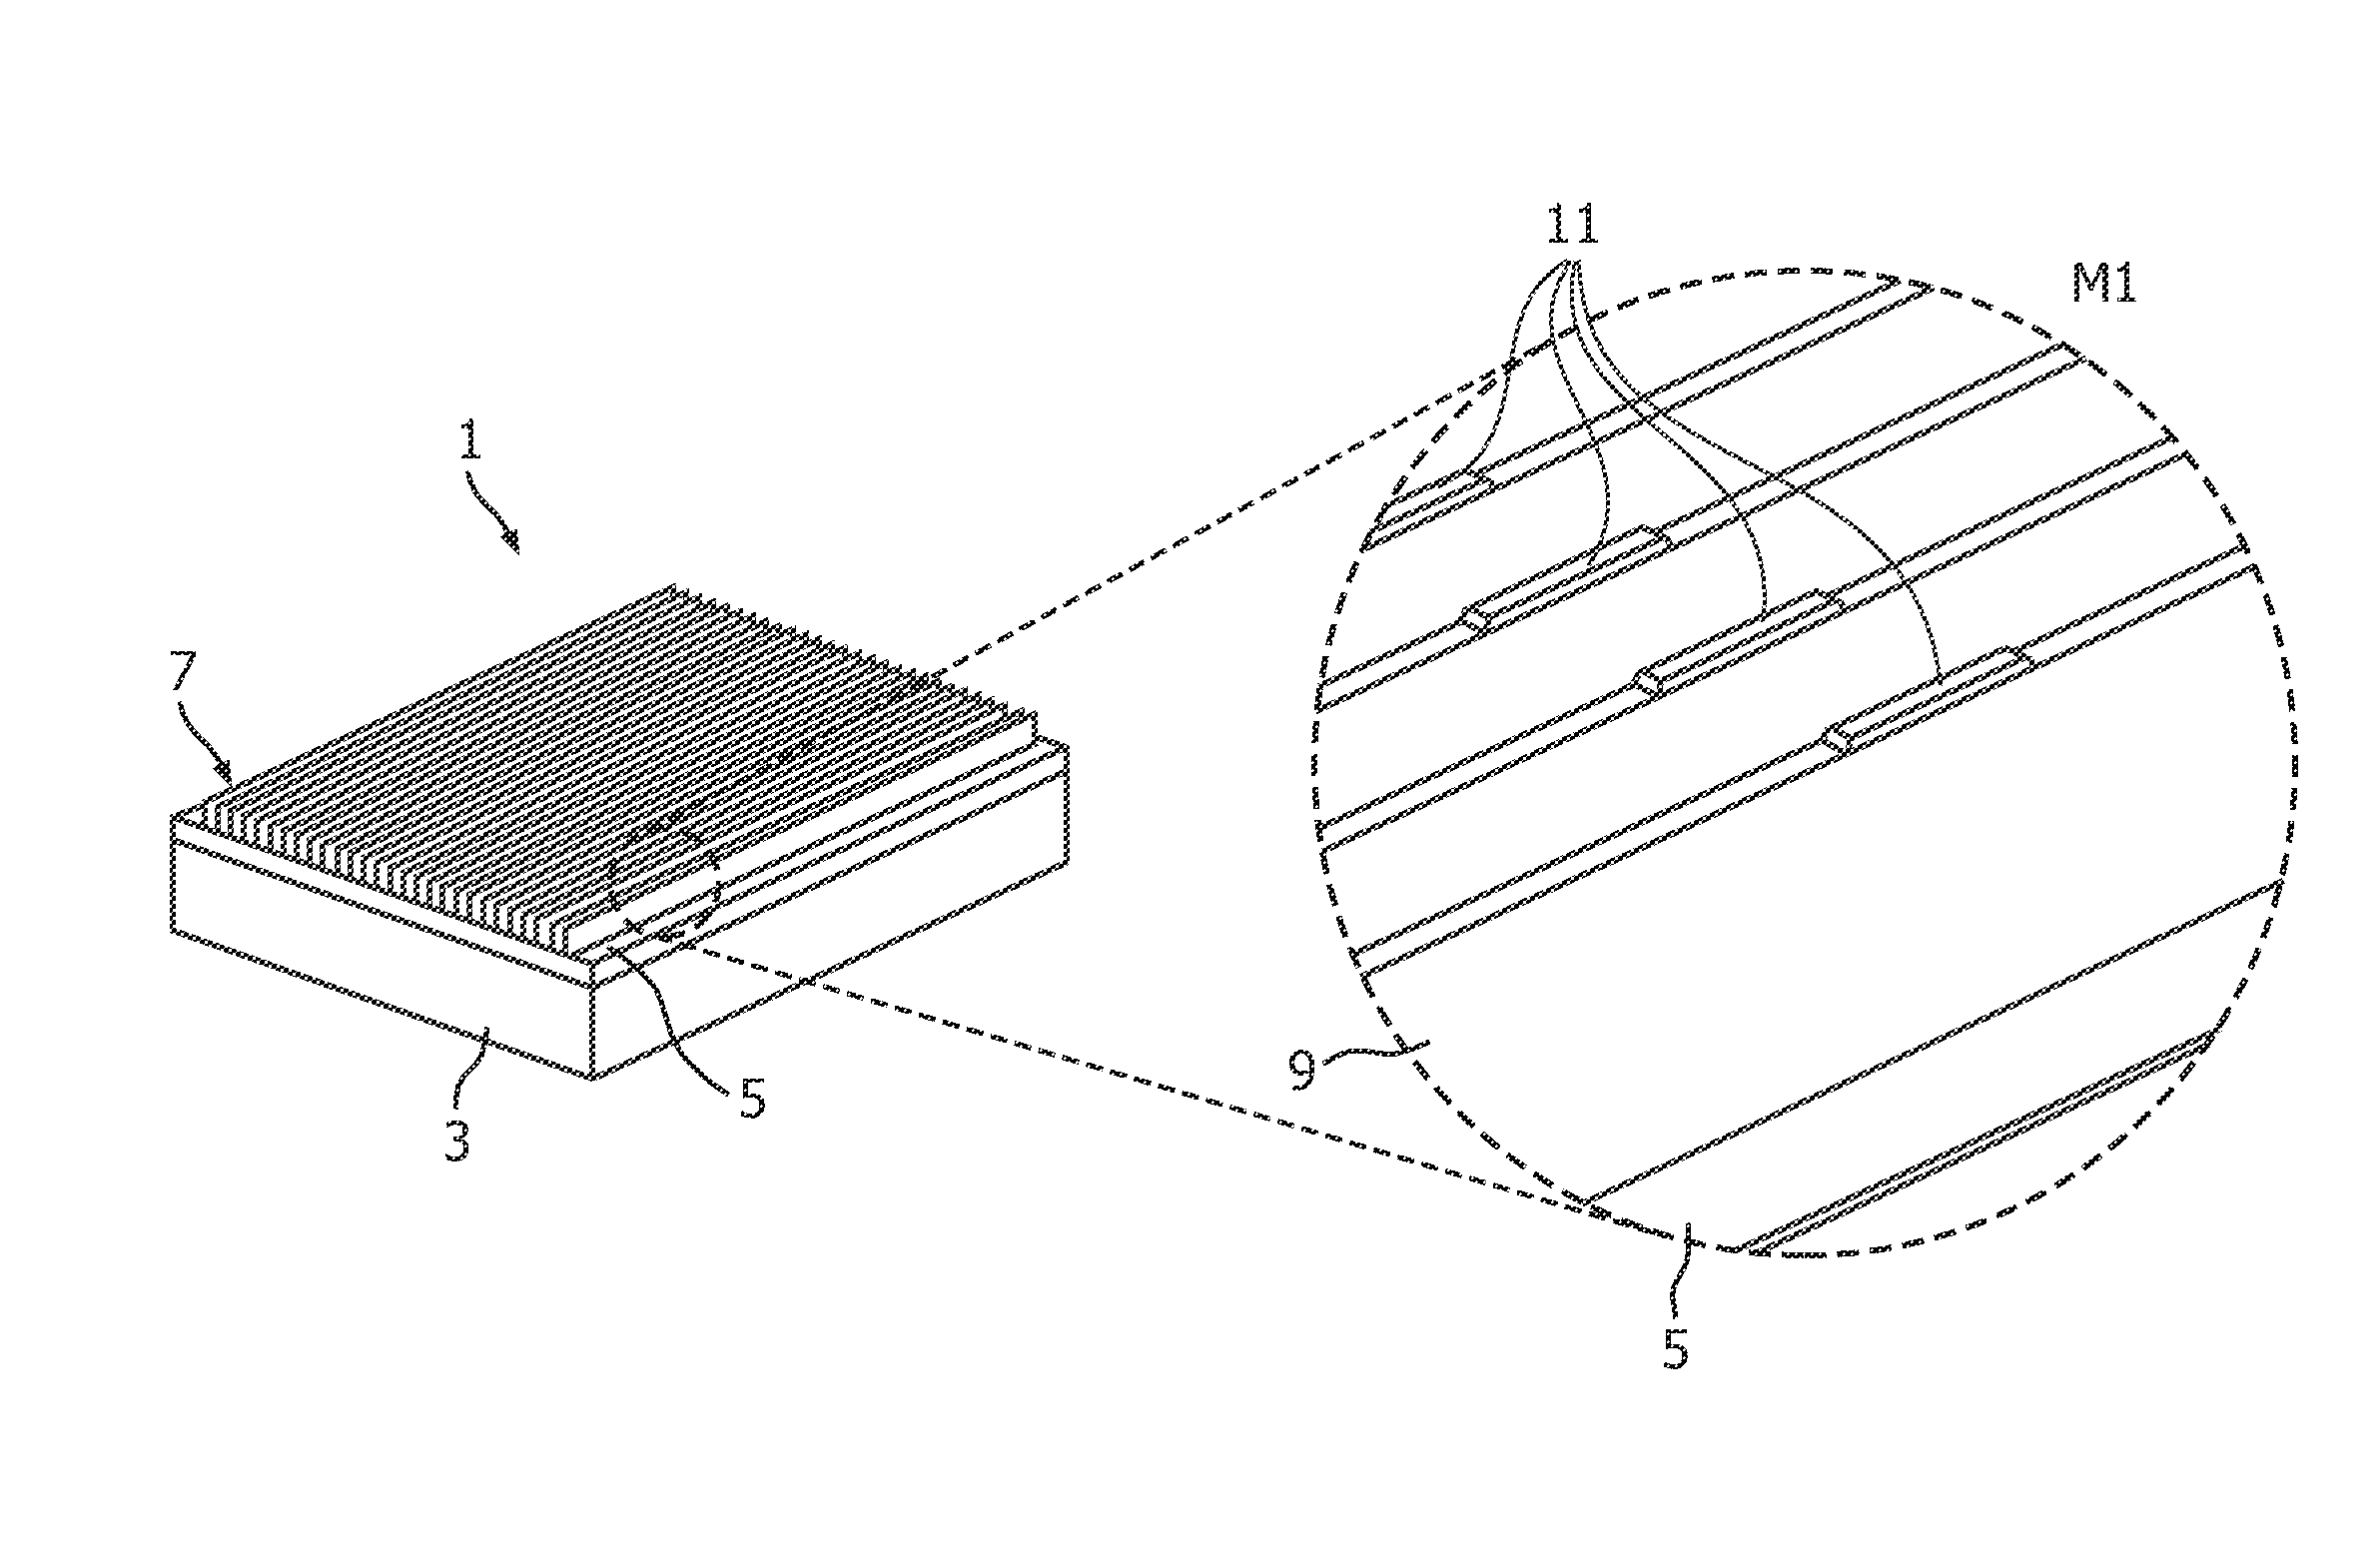 Grid and method of manufacturing a grid for selective transmission of electromagnetic radiation, particularly X-ray radiation for mammography applications